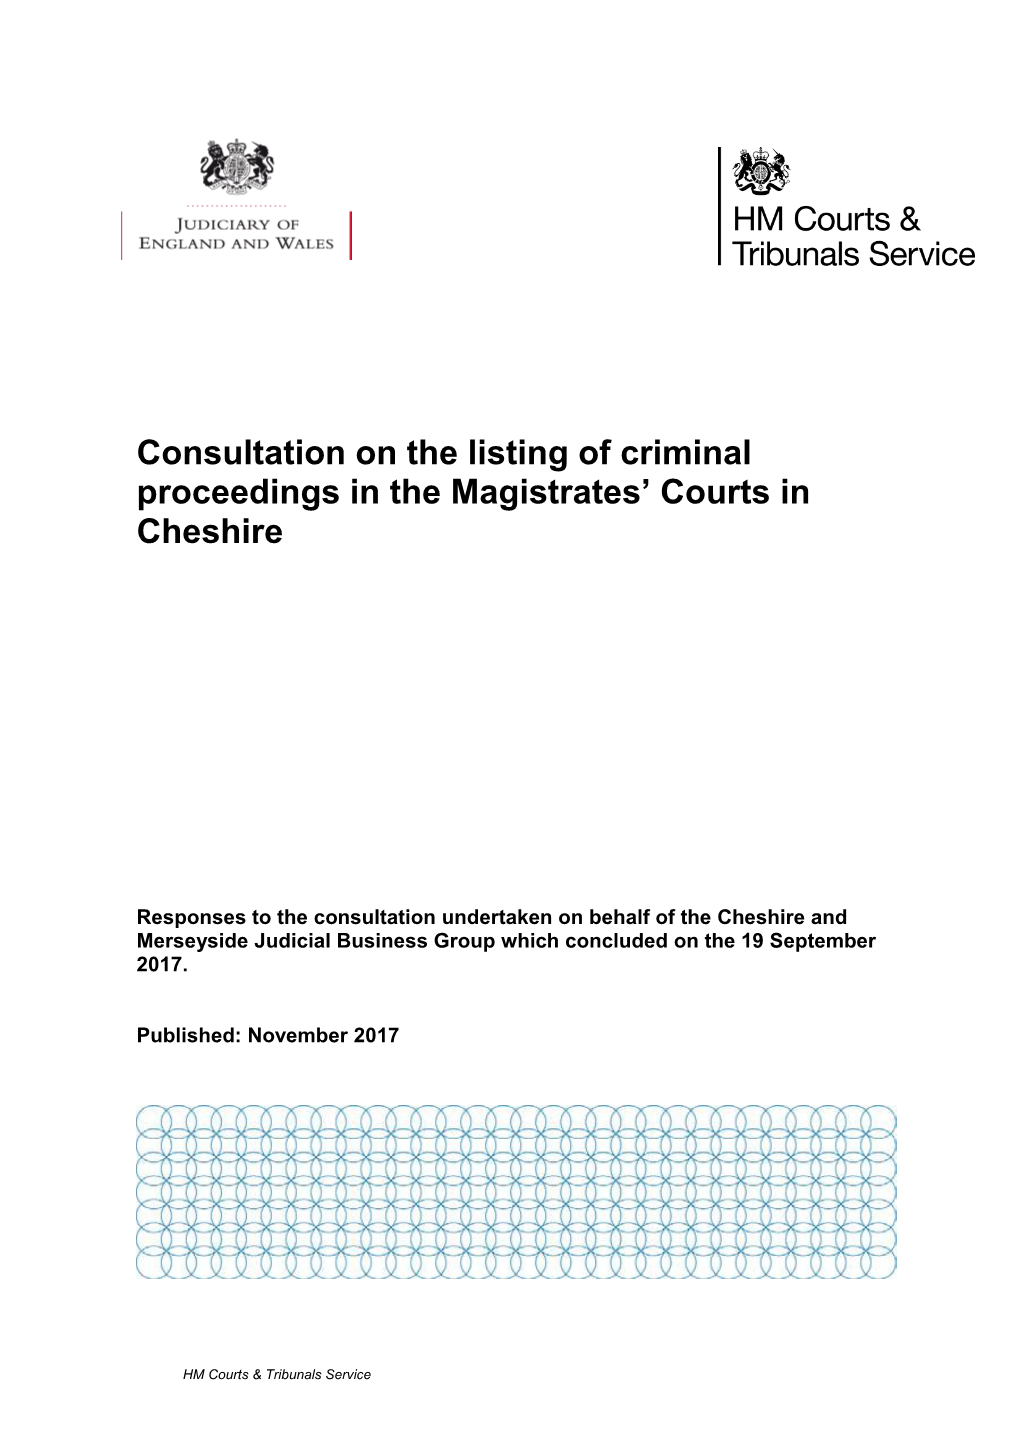 Consultation on the Listing of Criminal Proceedings in the Magistrates’ Courts in Cheshire